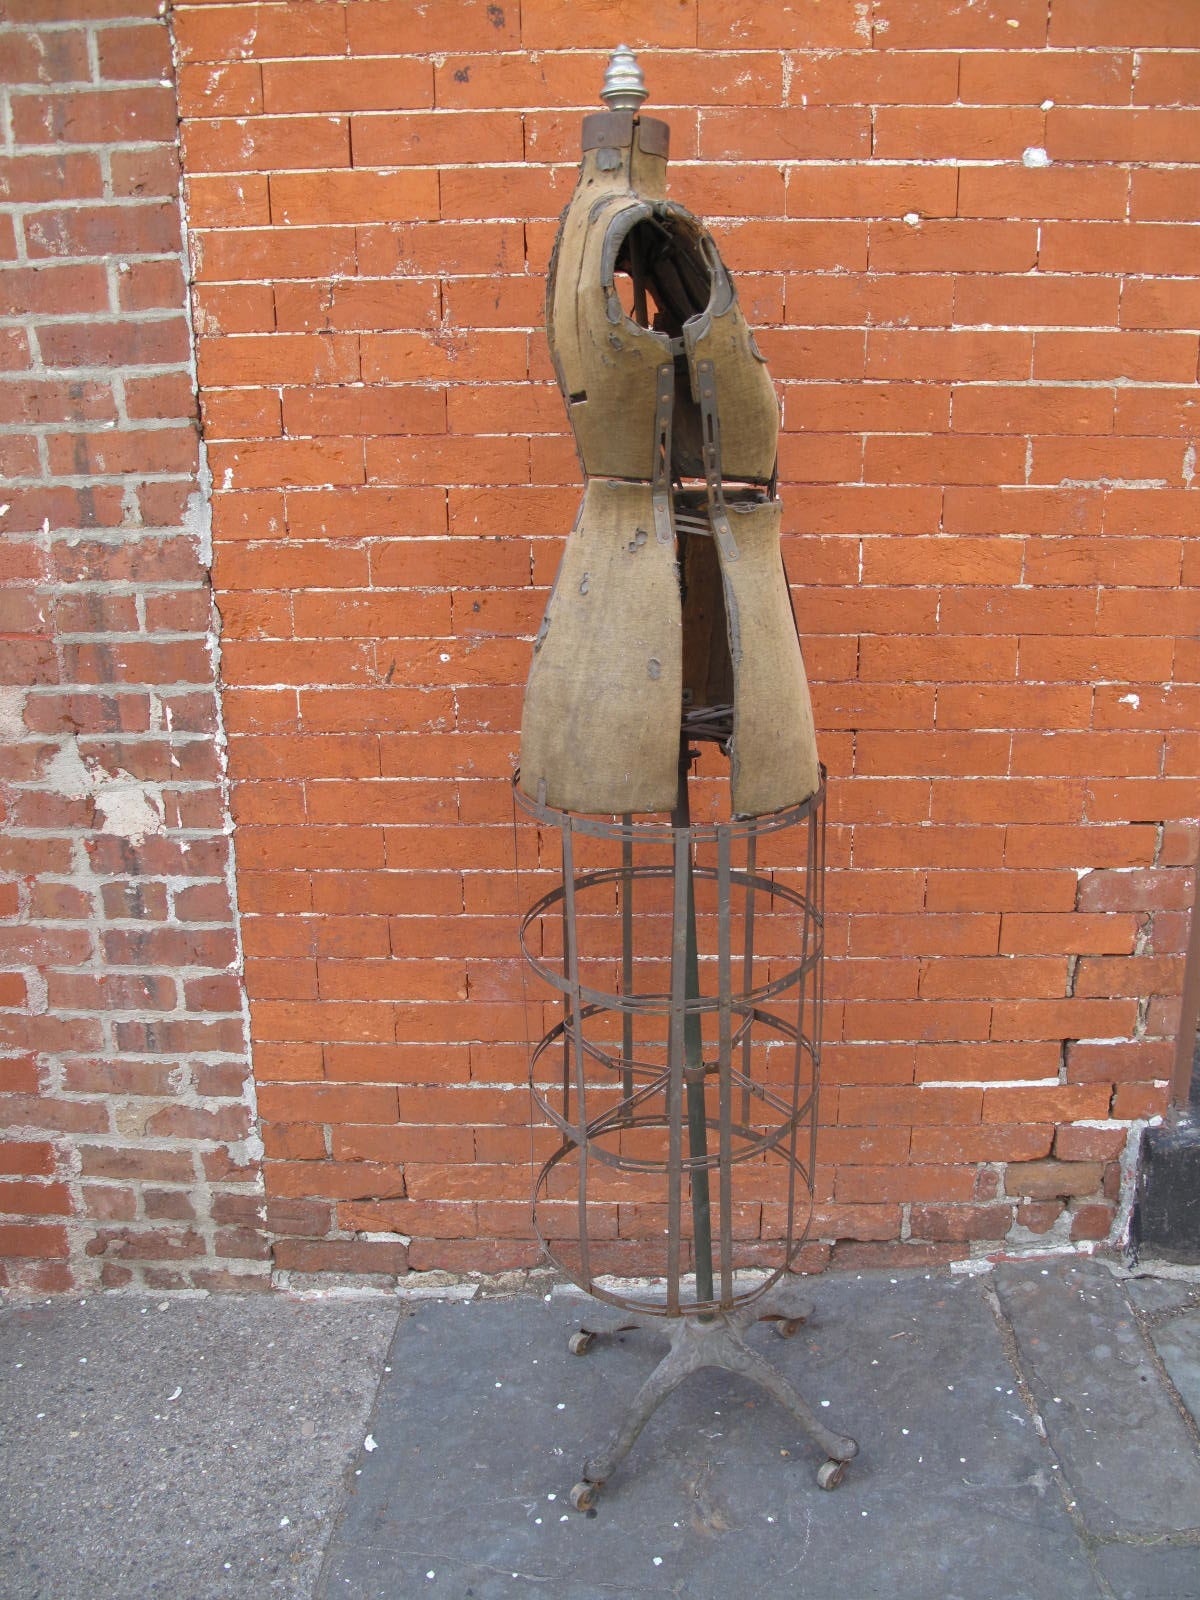 Expandable strap steel dress form. On wood casters. No apparent makers mark or label.